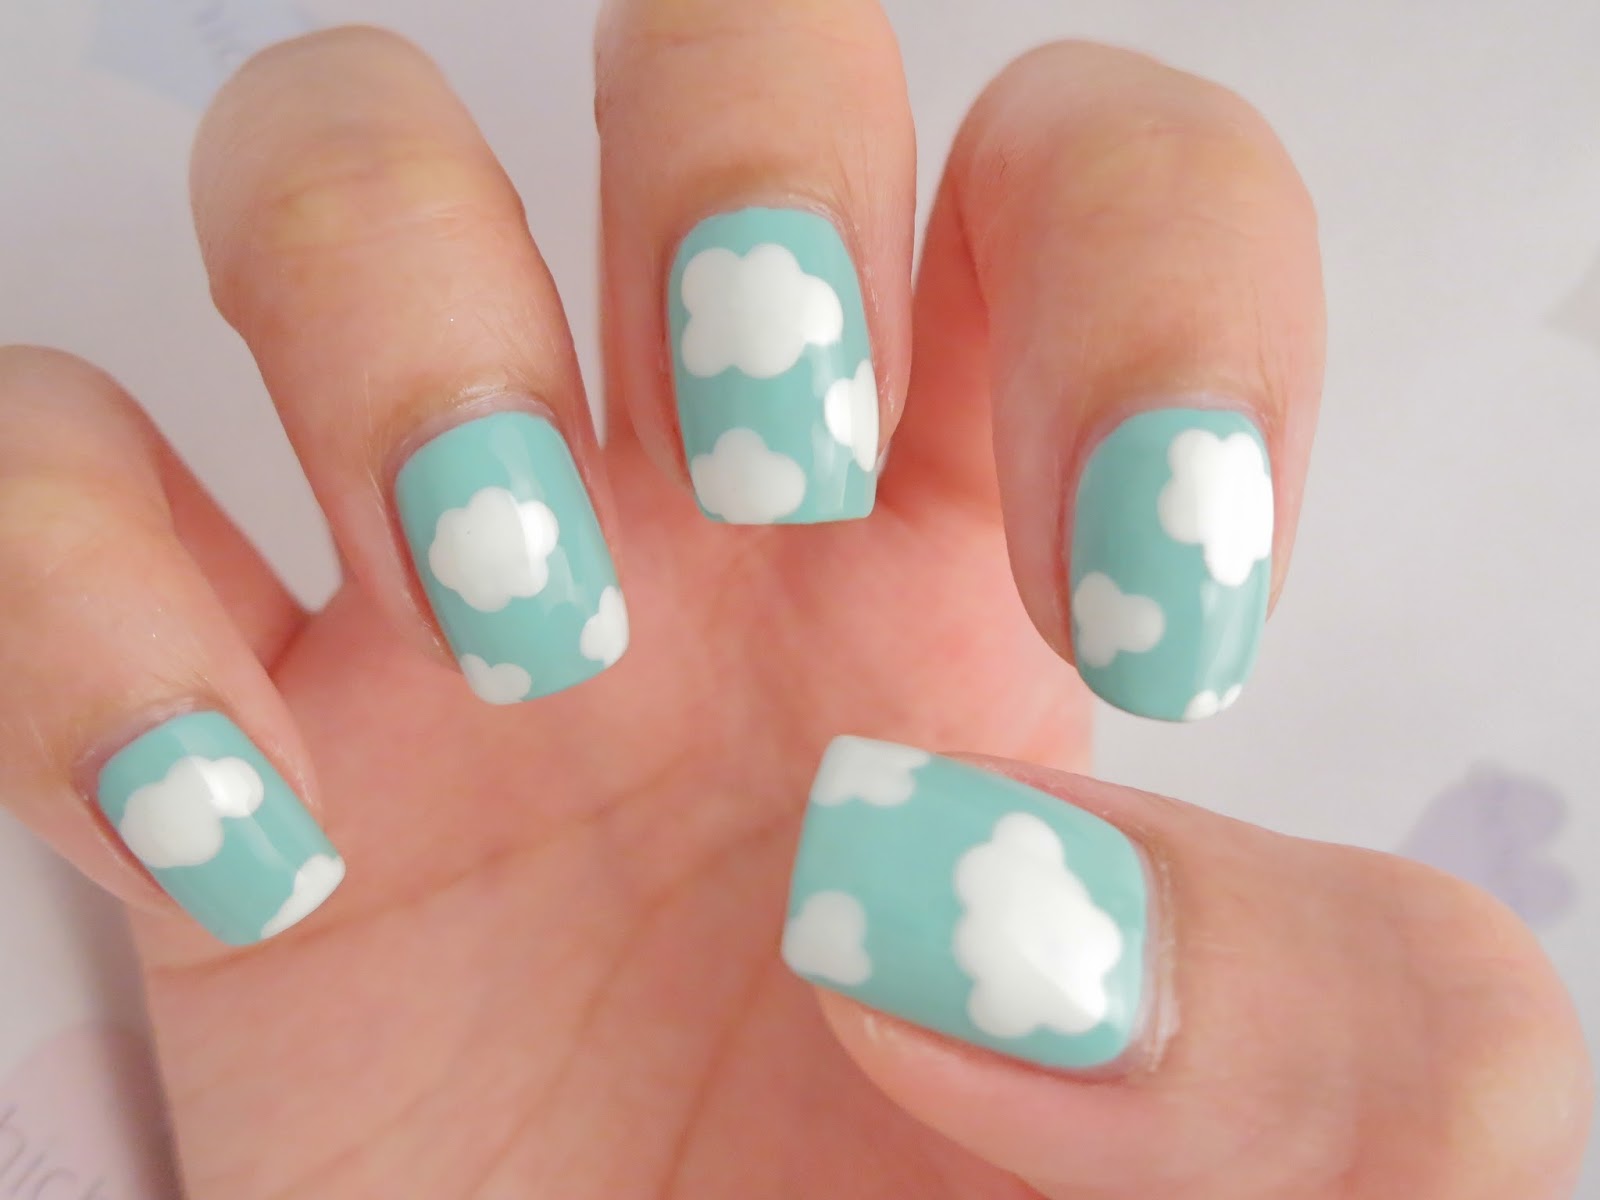 2. Blue and White Cloud Nail Art - wide 6